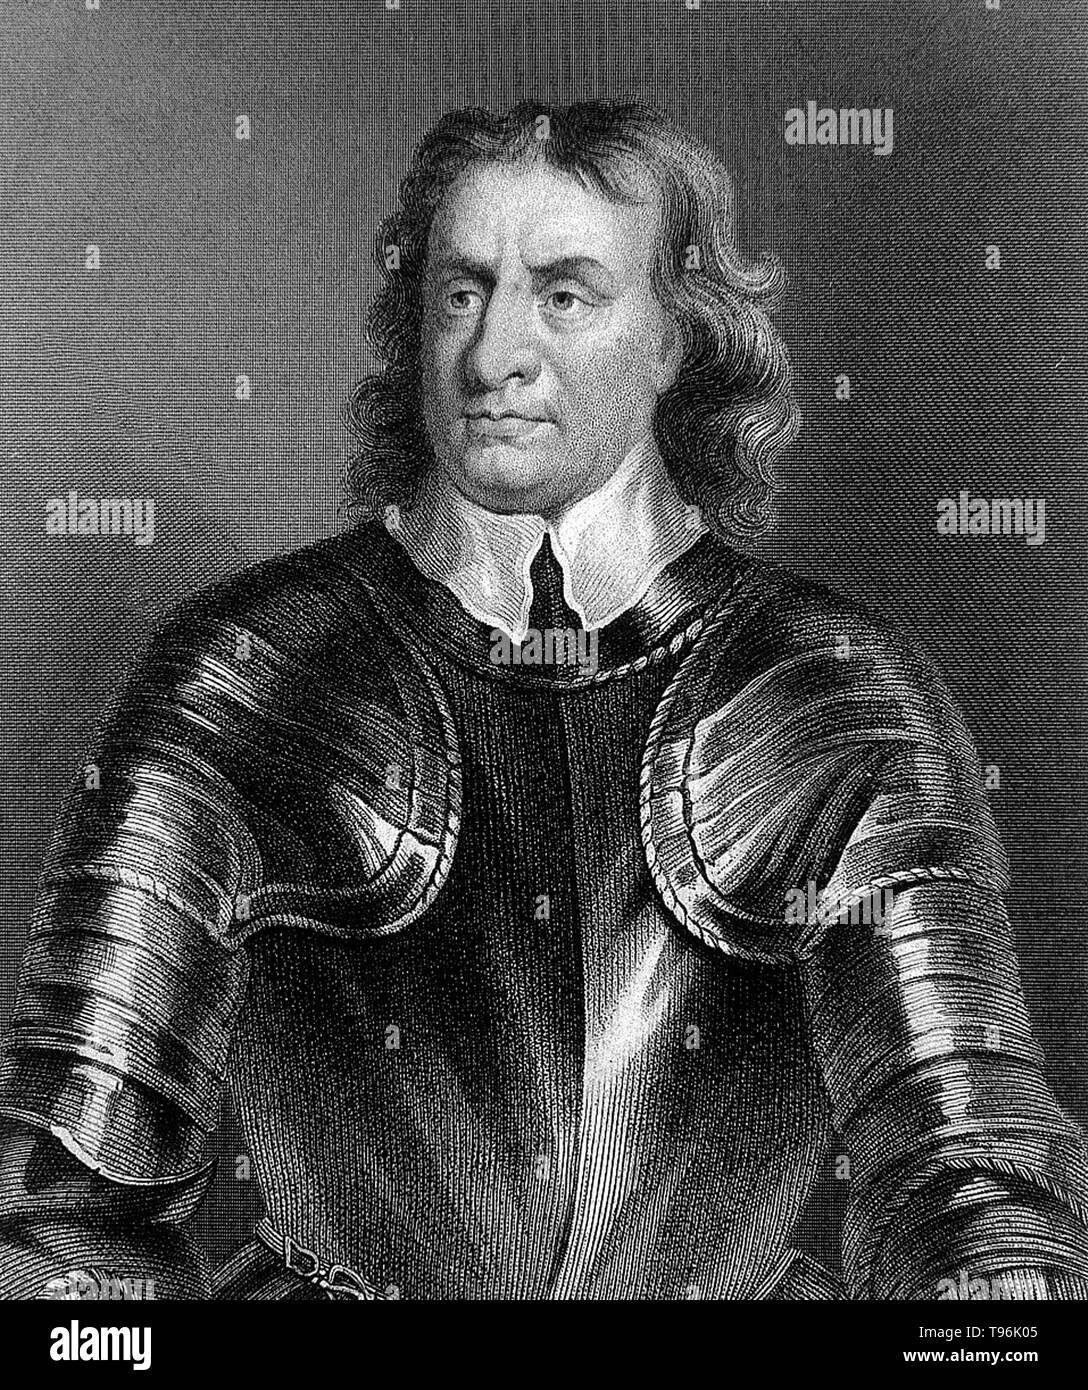 Oliver Cromwell (April 25, 1599 - September 3, 1658) was an English military and political leader. He served as Lord Protector of the Commonwealth of England, Scotland, and Ireland from 1653 until his death, acting simultaneously as head of state and head of government of the new republic. Little is known of the first 40 years of his life as only four of his personal letters survive alongside a summary of a speech he delivered in 1628. Stock Photo